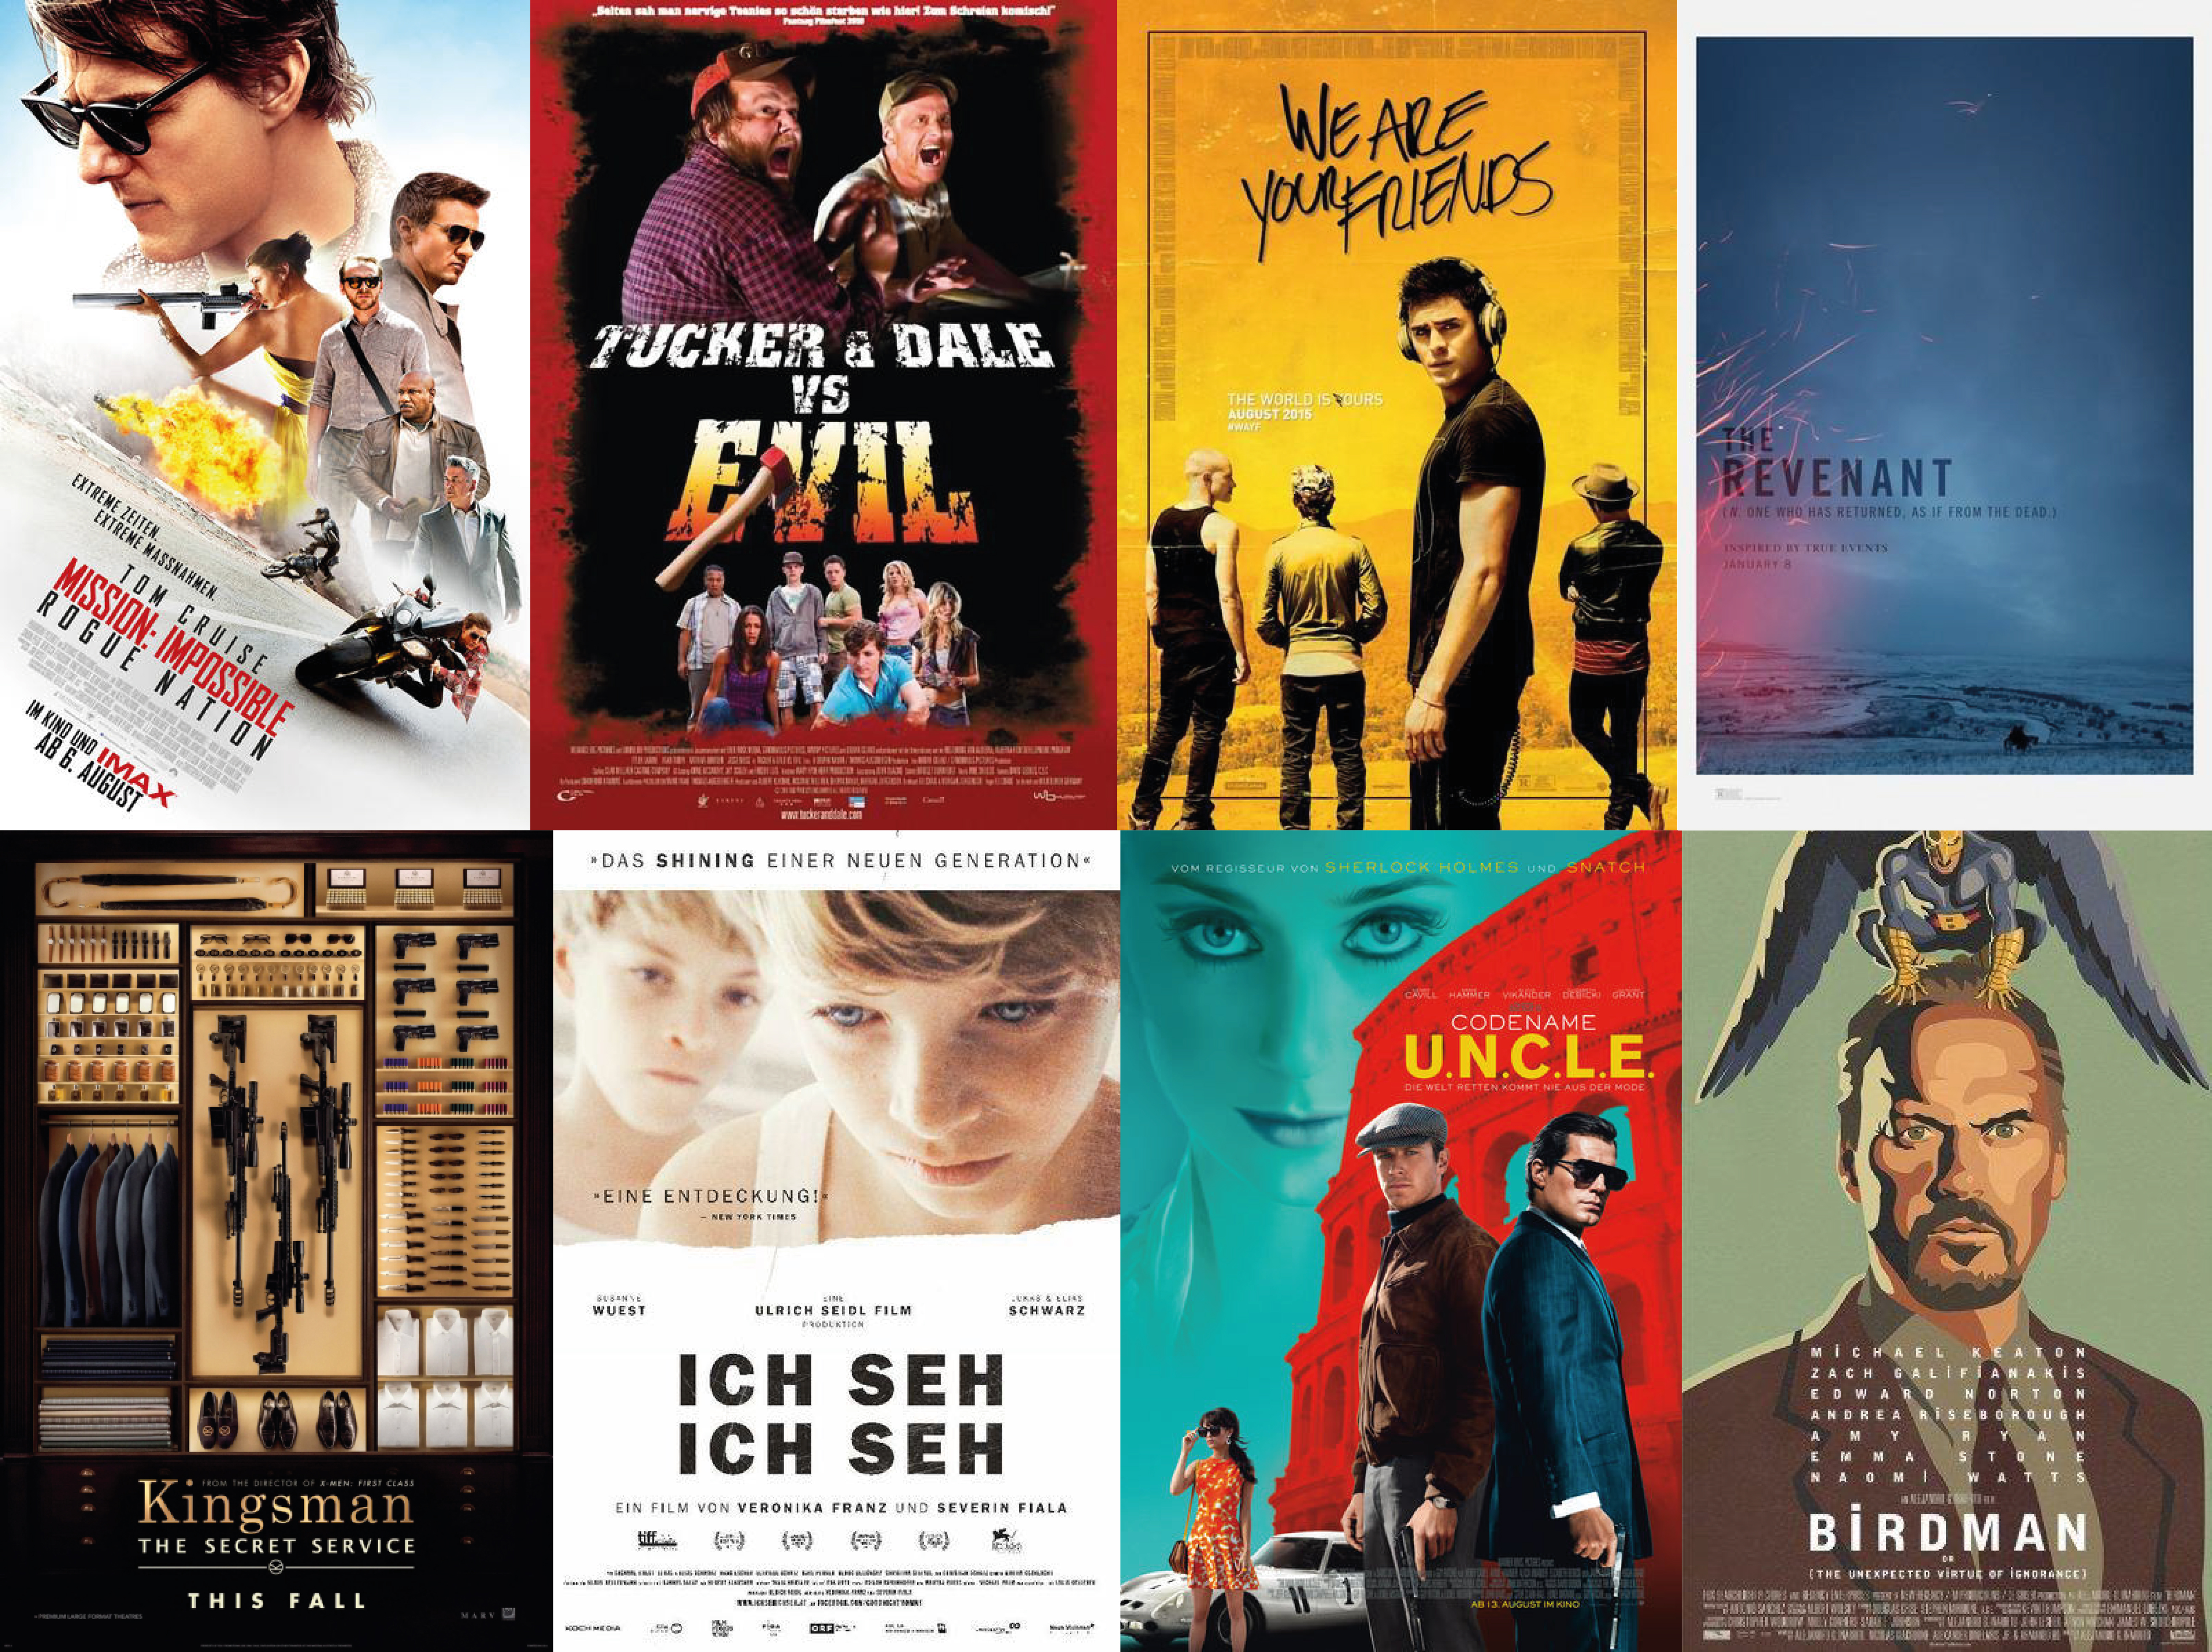  ©Paramount Pictures / Magnet Releasing / Working Title Films / Anonymous Content / 20th Century Fox / Ulrich Seidl Film Produktion GmbH / Warner Bros. Pictures / Regency Enterprises